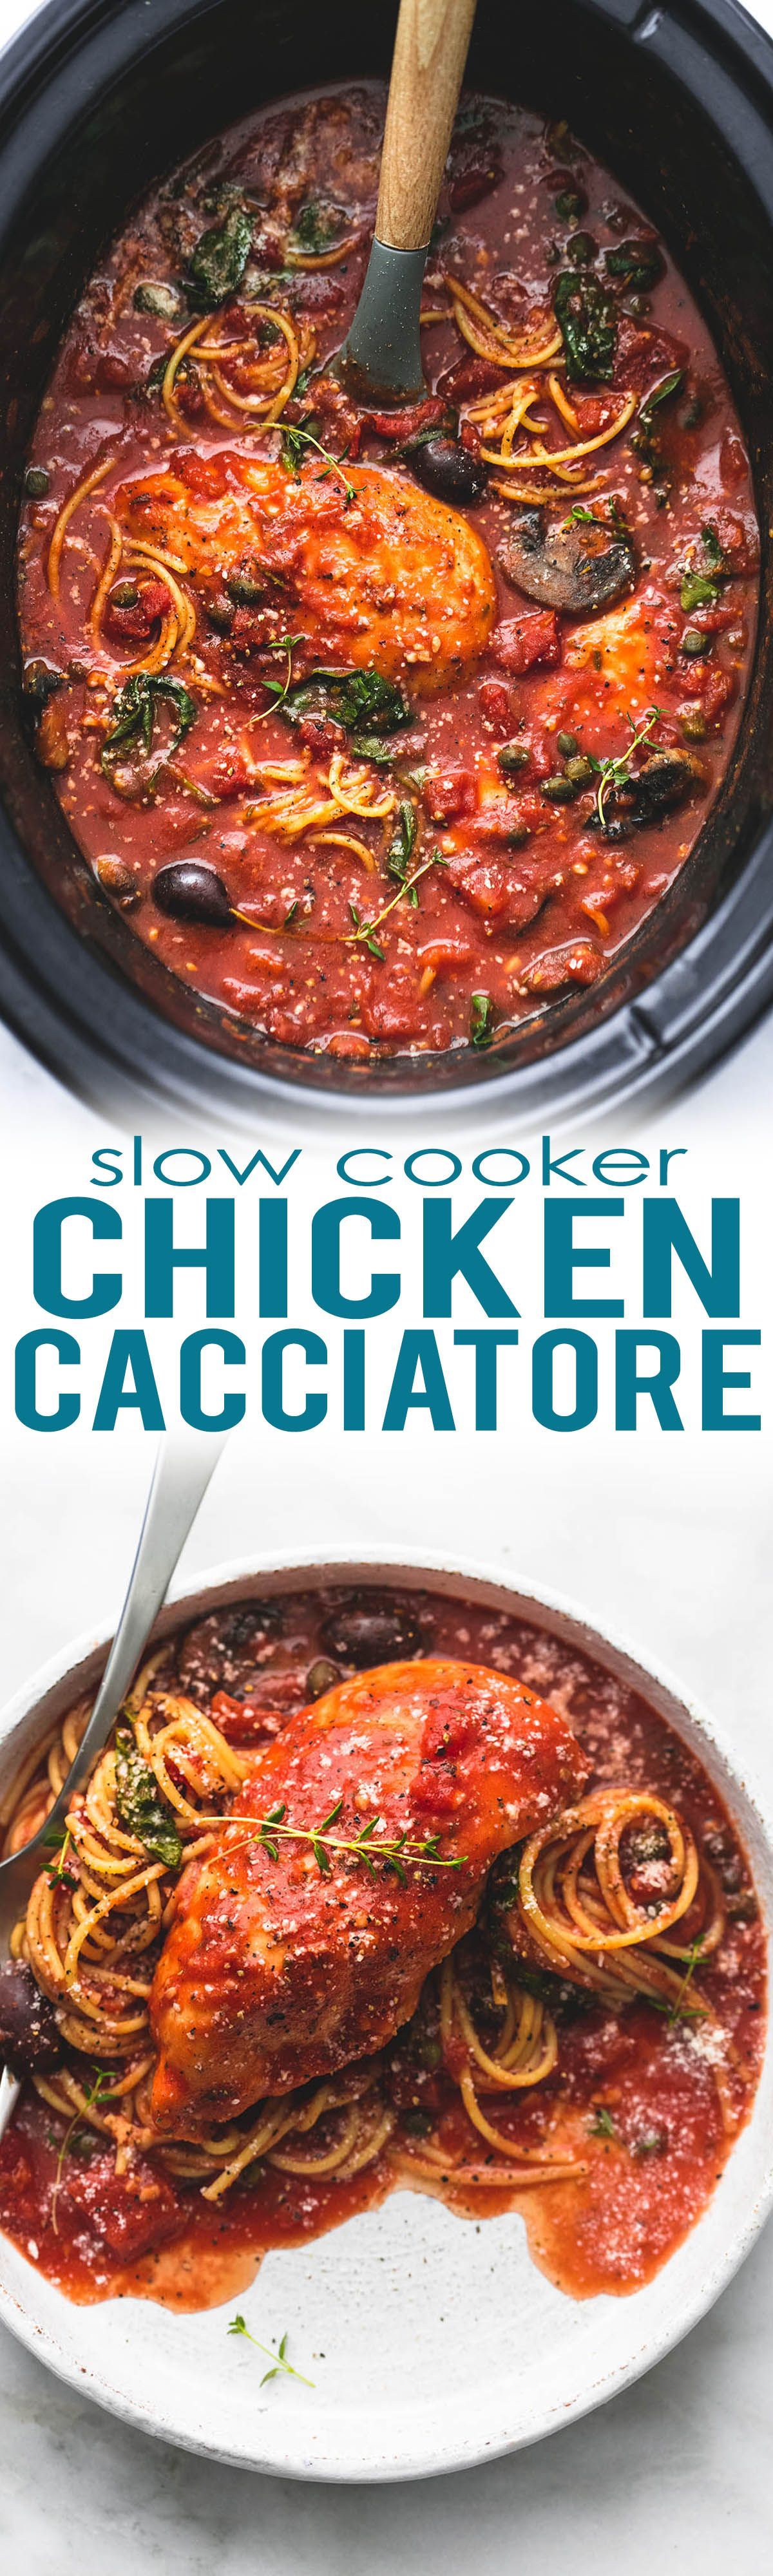 Easy and Healthy Slow Cooker Chicken Cacciatore made in the crockpot with a few minutes of prep! | lecremedelacrumb.com